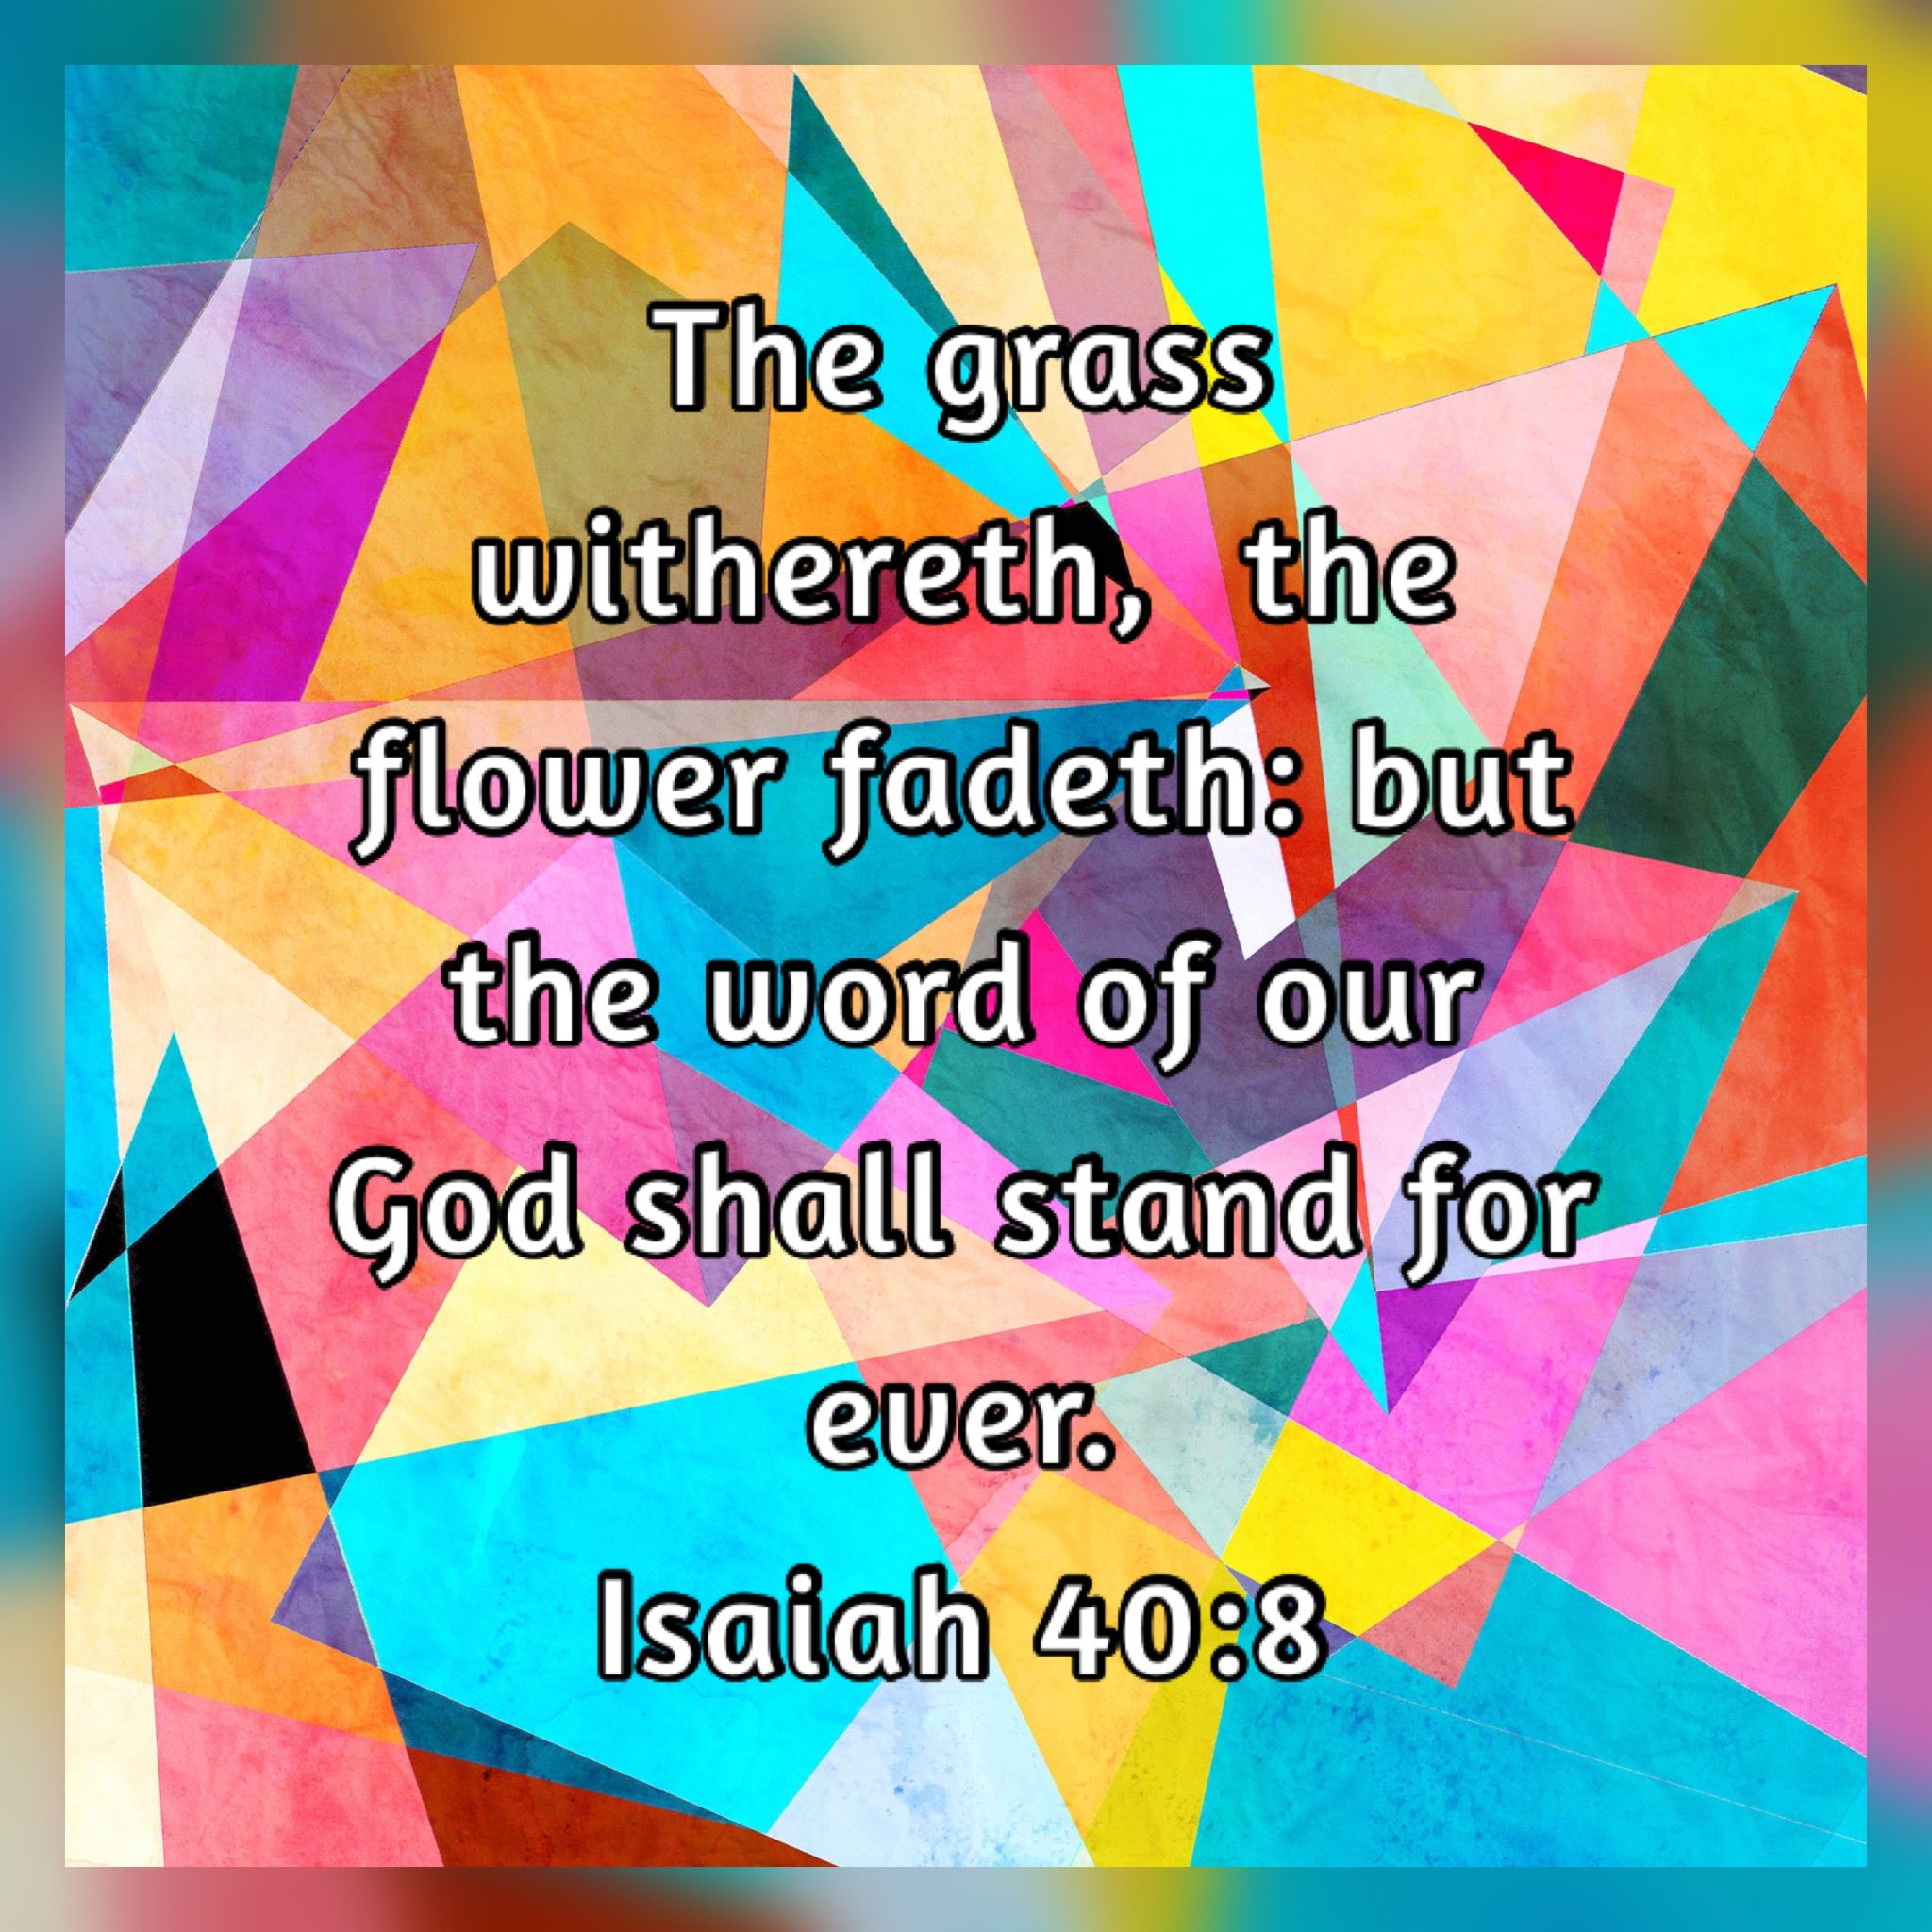 The grass withereth} the flower fadeth: but the word of our God shall stand for eUera Isaiah 40:8